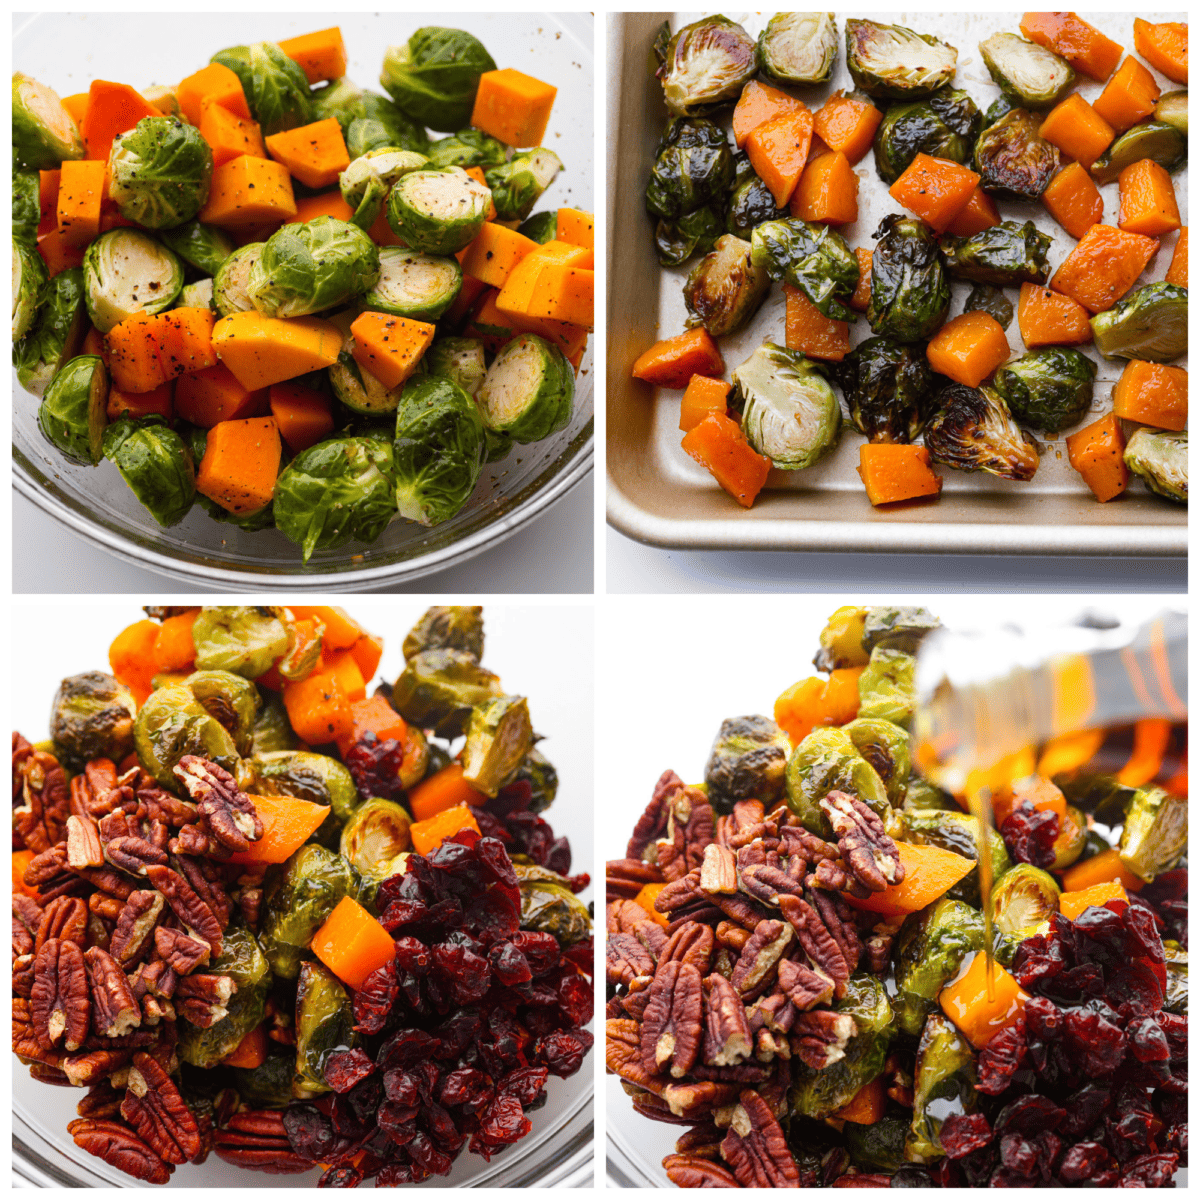 4-photo collage of the vegetables being roasted and combined with the other ingredients.